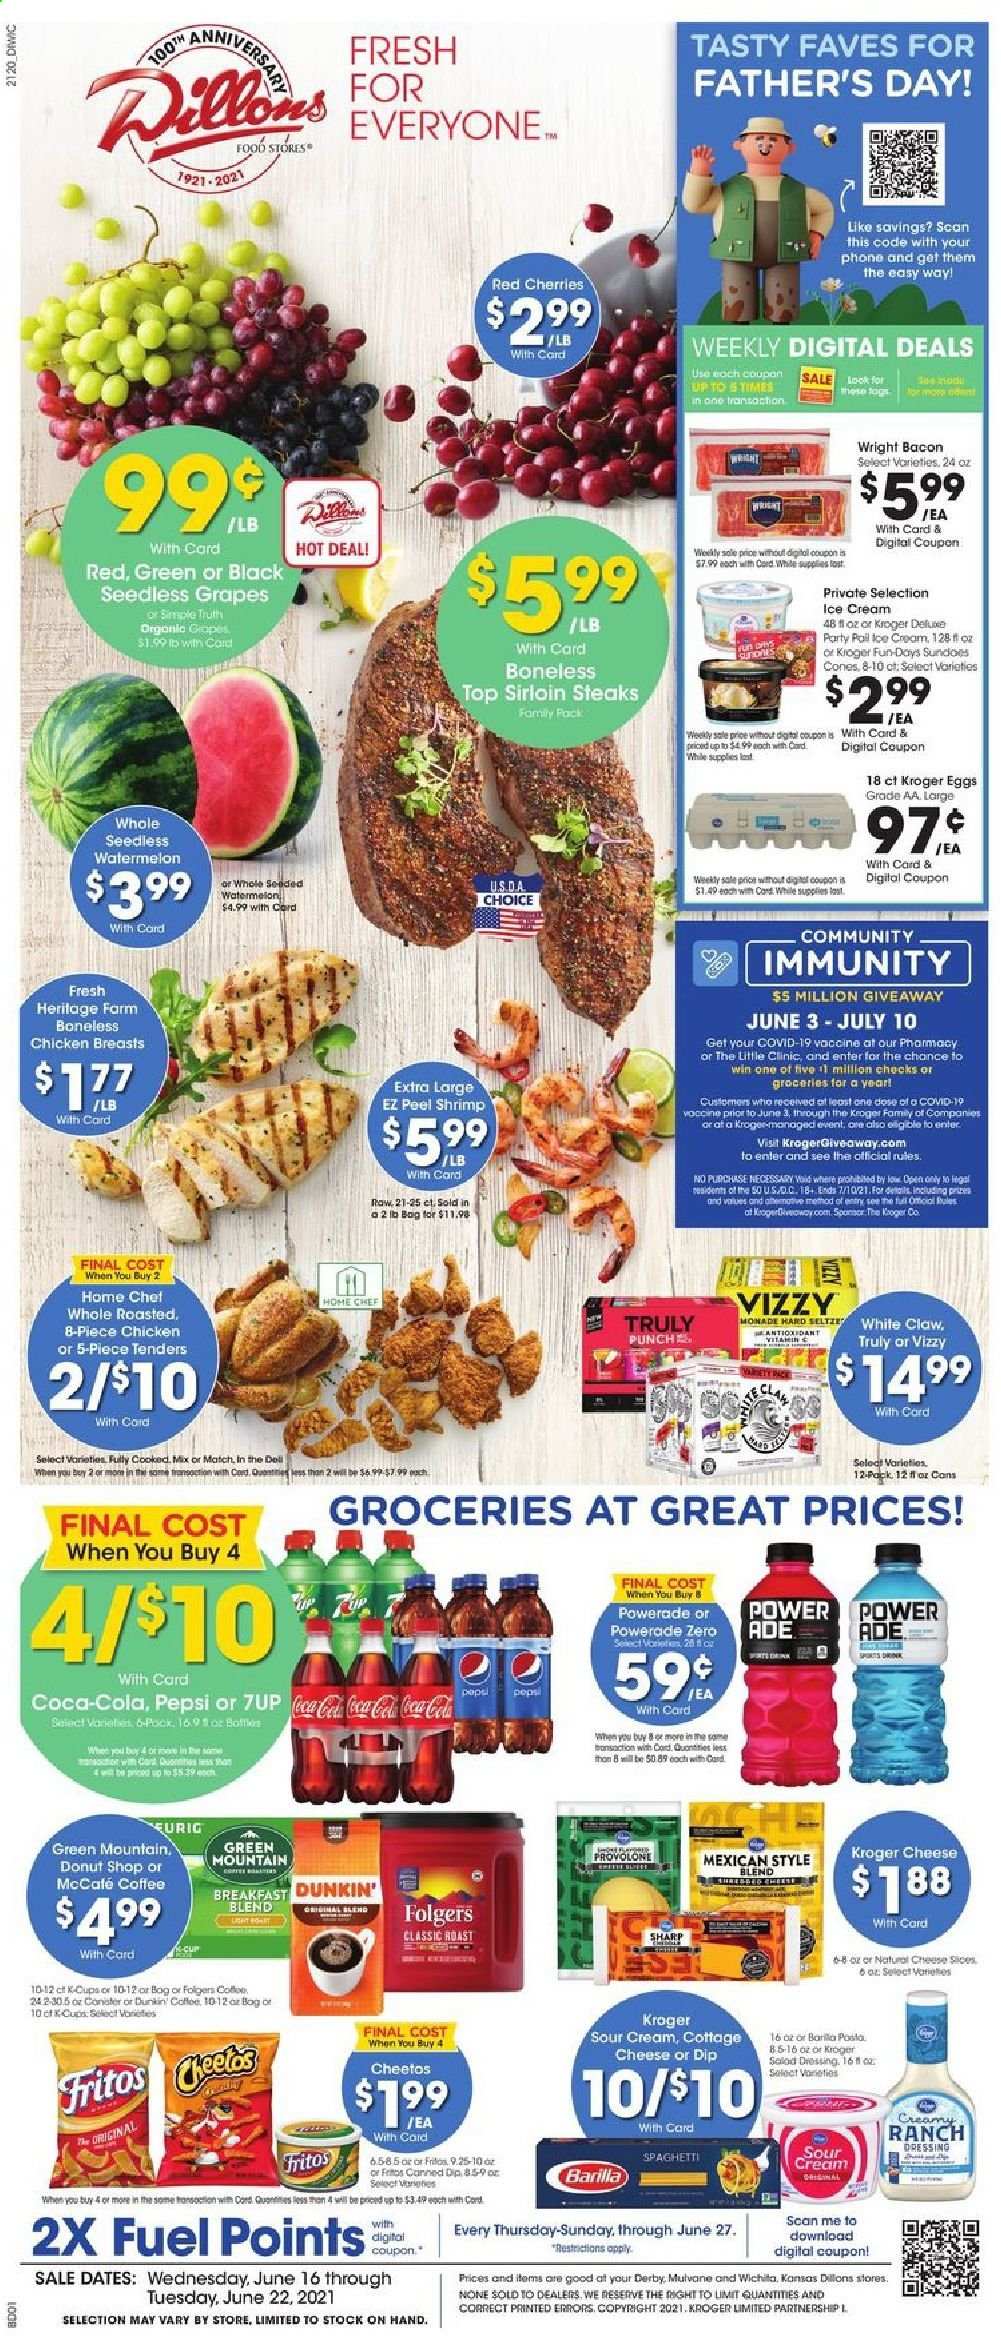 thumbnail - Dillons Flyer - 06/16/2021 - 06/22/2021 - Sales products - seedless grapes, grapes, watermelon, cherries, shrimps, spaghetti, Barilla, bacon, cottage cheese, Provolone, eggs, sour cream, ranch dressing, dip, ice cream, Fritos, Cheetos, dressing, Coca-Cola, Powerade, Pepsi, 7UP, coffee, Folgers, coffee capsules, McCafe, K-Cups, Green Mountain, White Claw, TRULY, chicken breasts, steak, sirloin steak, Rin, Sharp. Page 1.